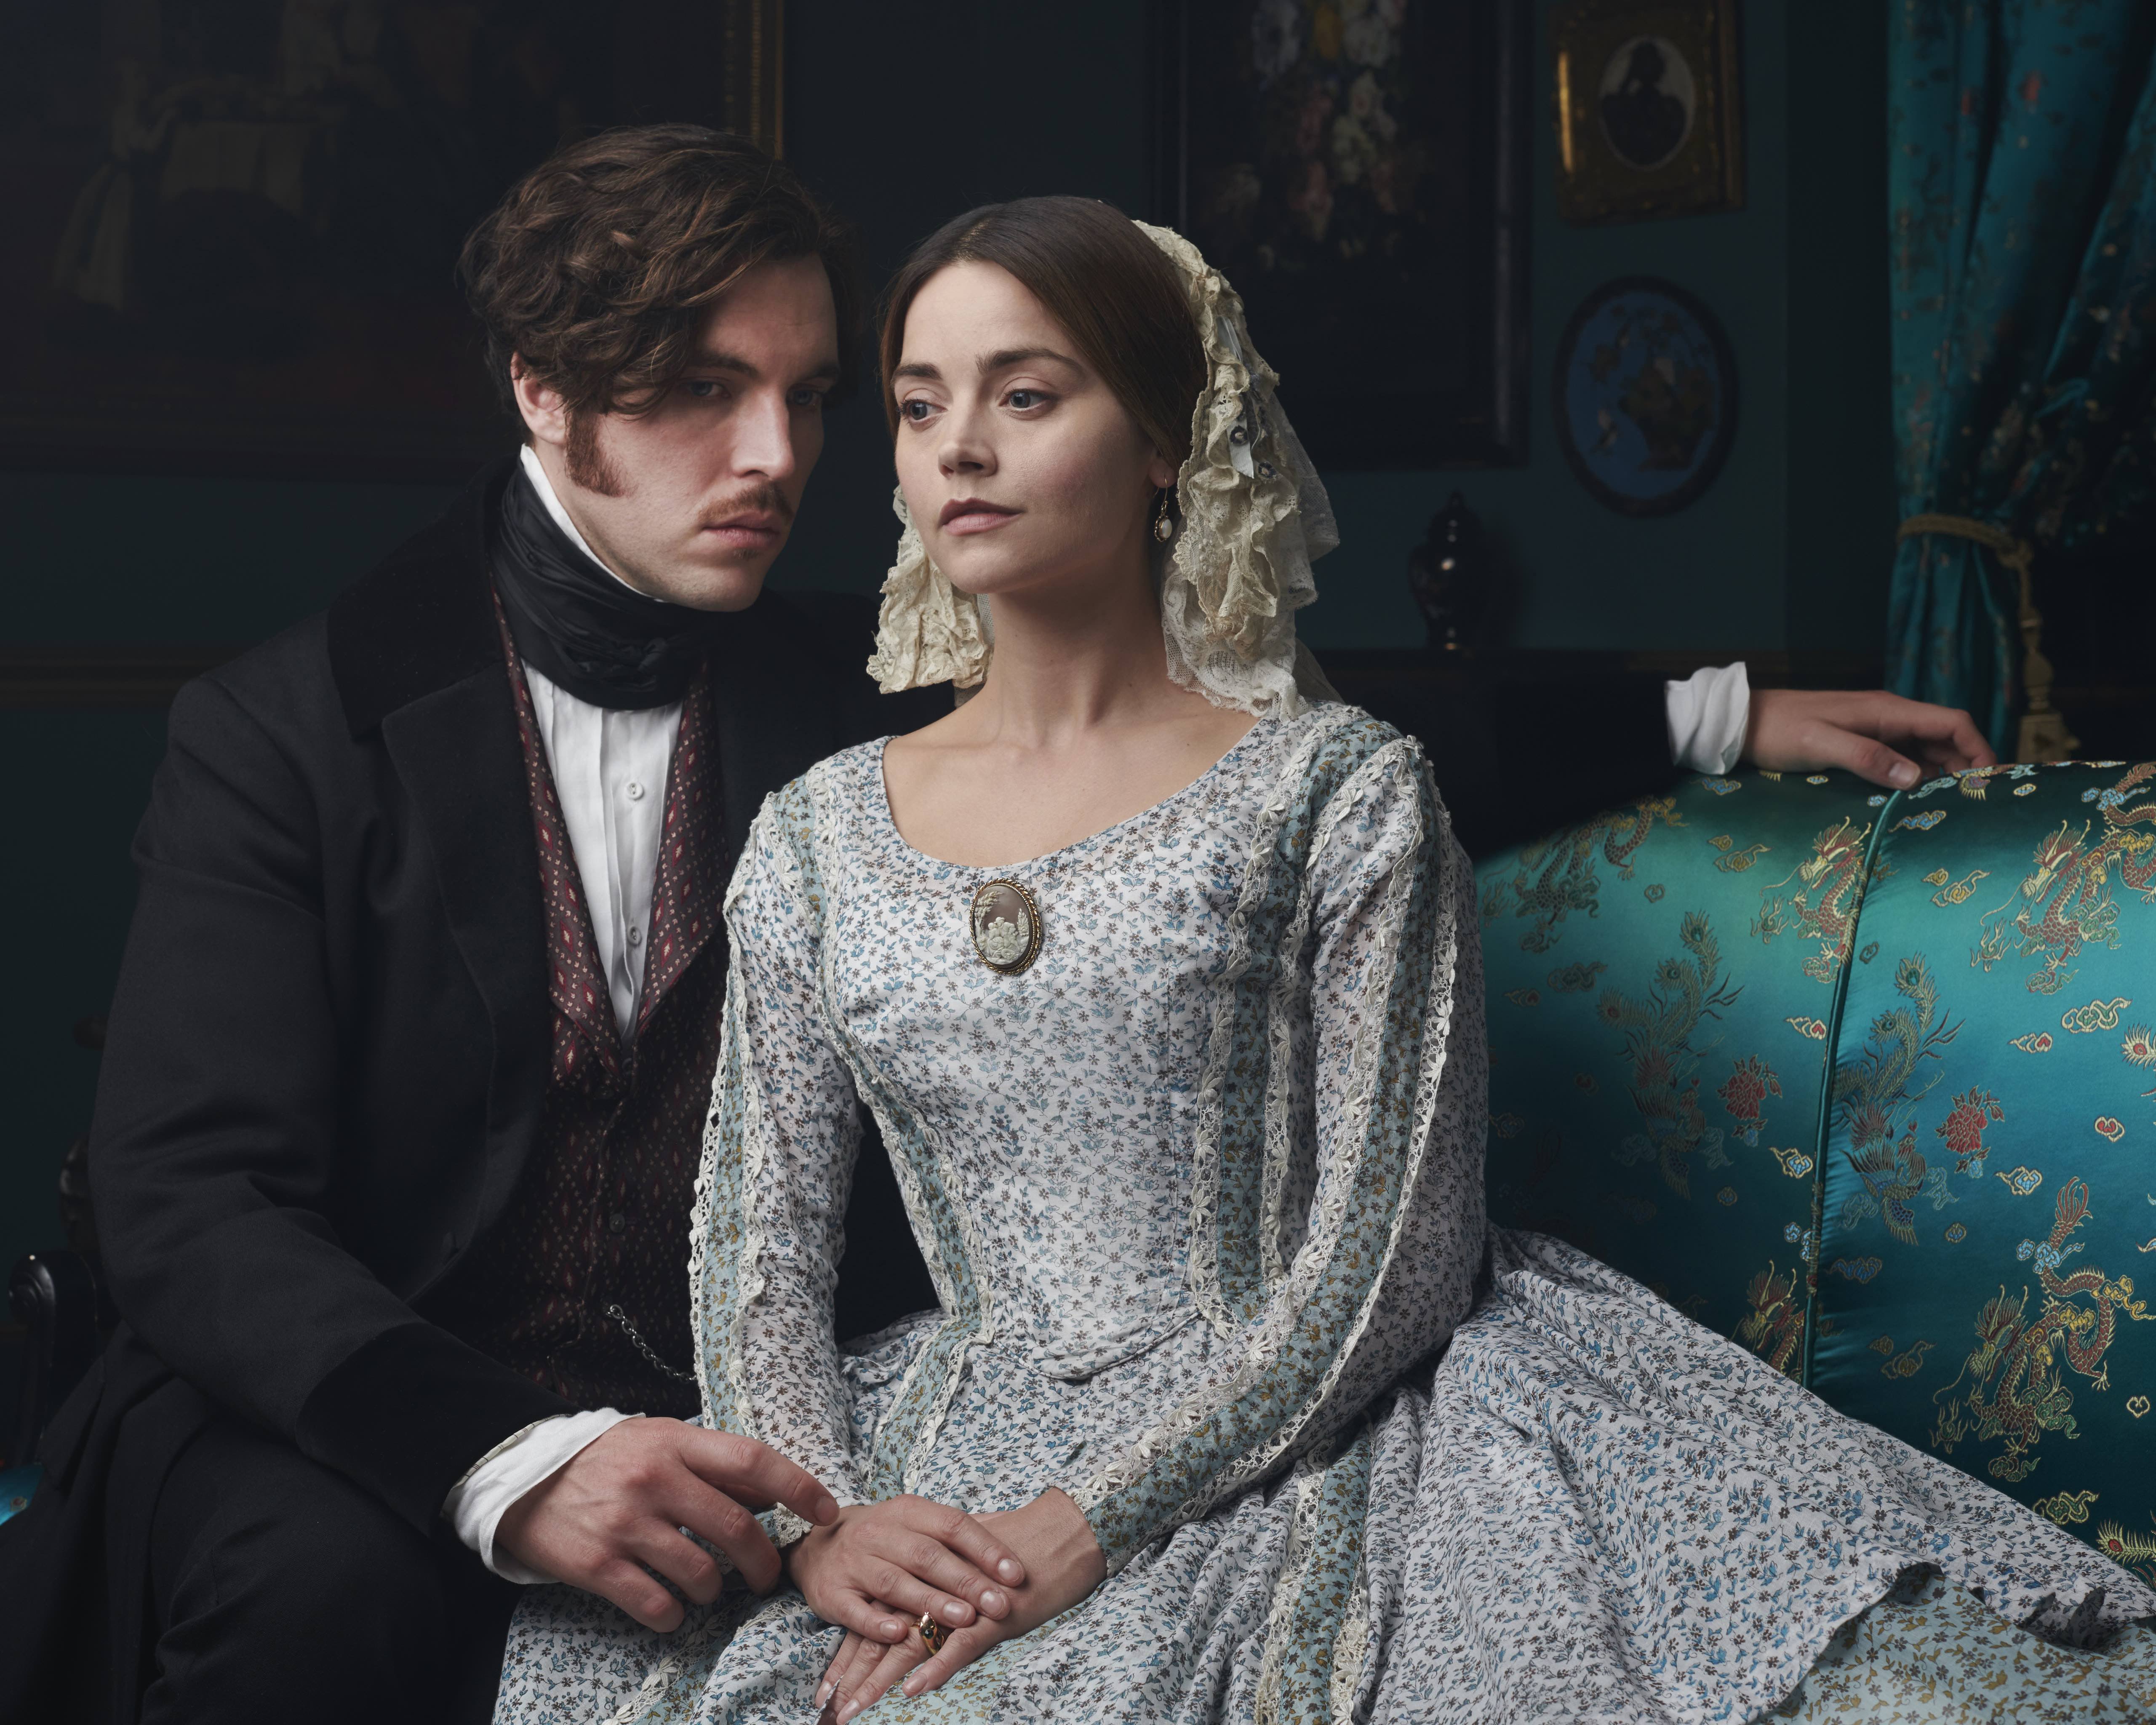 Tom Hughes as Prince Albert and Jenna Coleman as Queen Victoria sitting on a couch 